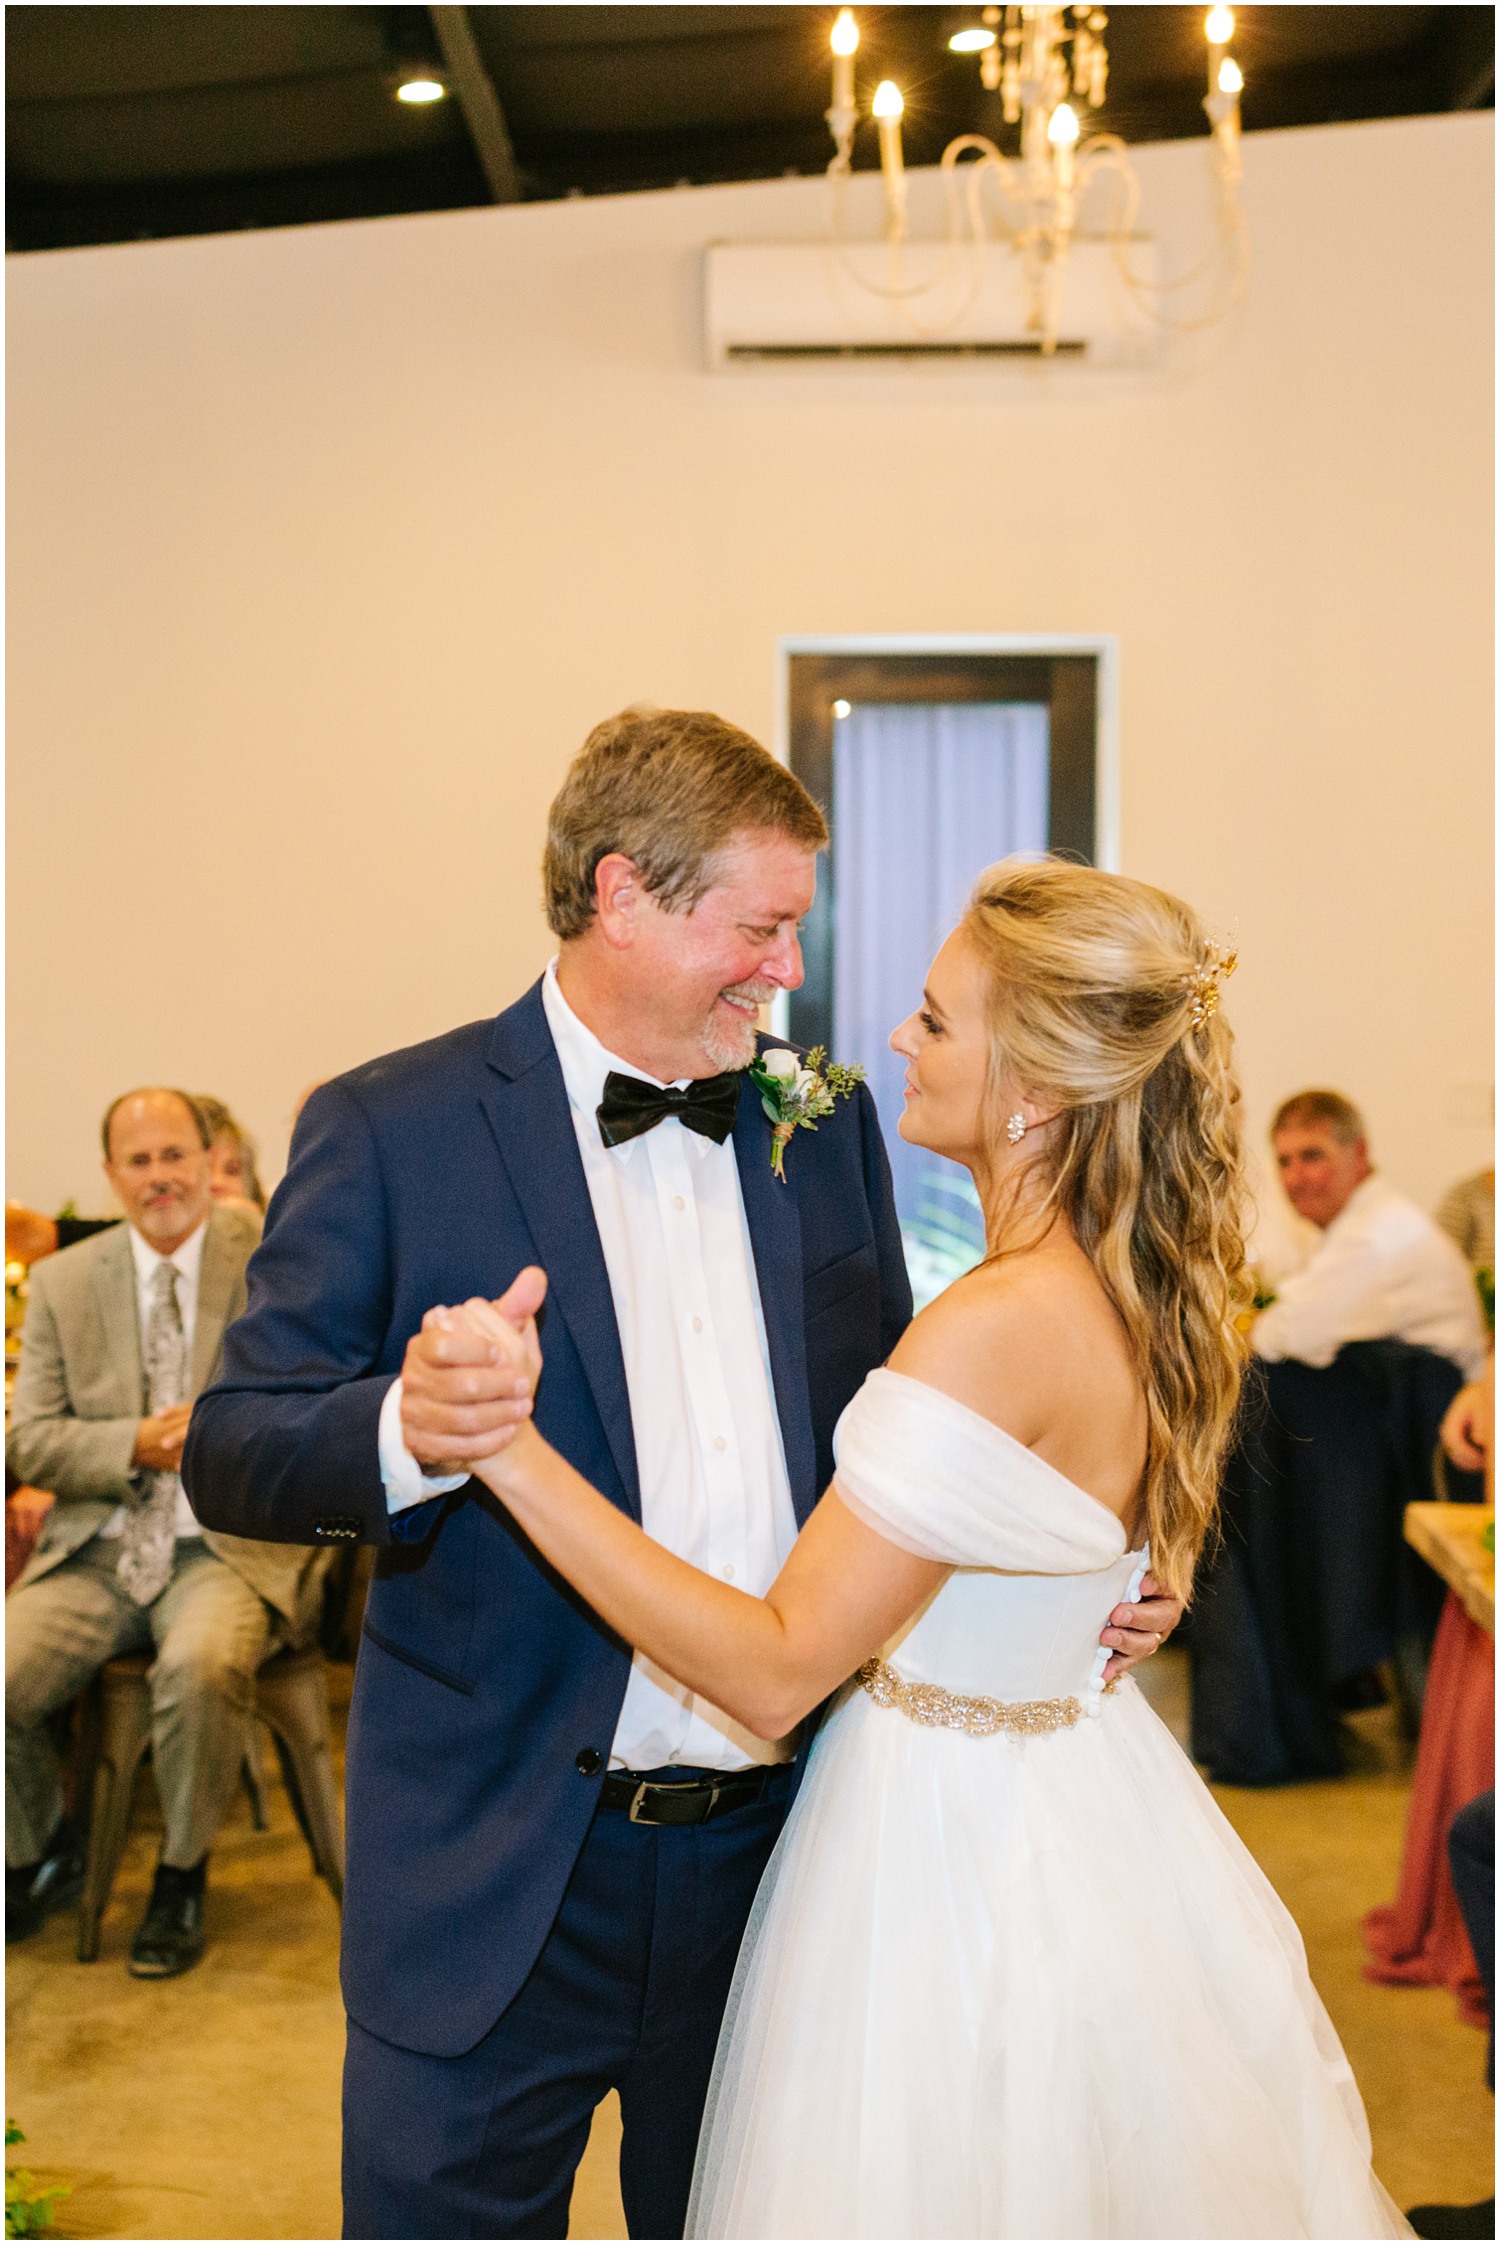 father-daughter dance at The Meadows Raleigh